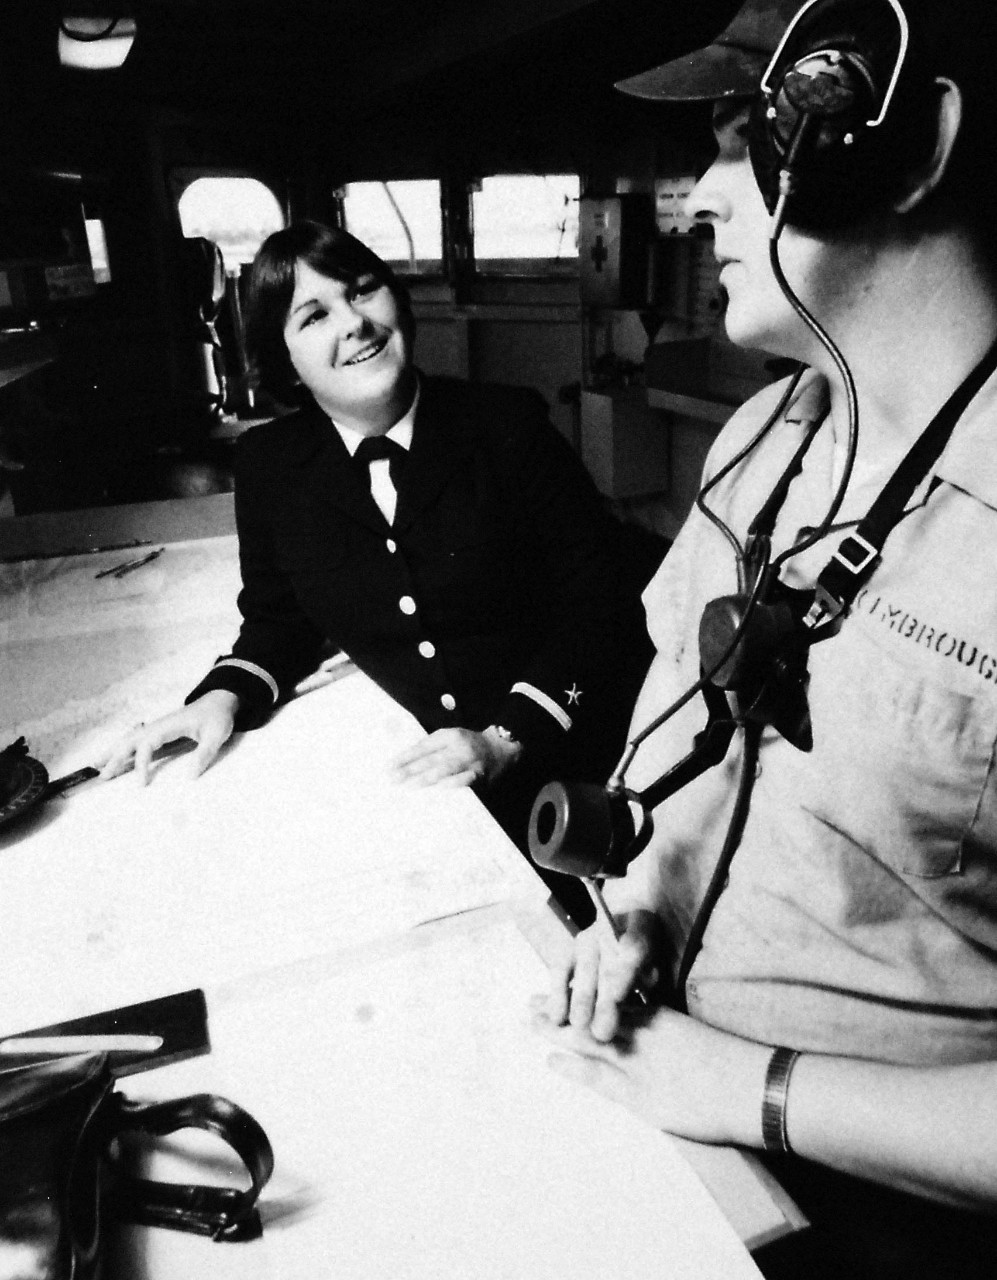 428-GX-USN 1173348:  Ensign Roberta McIntyre, October 1978.   McIntyre chats with a crewman on the bridge of USS Dixon (AS-37) during a tour of the ship at San Diego, California, where she is assigned as Assistant Navigator.  She is one of the first group of women officers to serve onboard U.S. Navy ships.  Photographed by PH2 J. Brown, October 31, 1978.  Official U.S. Navy Photograph, now in the collections of the National Archives. 